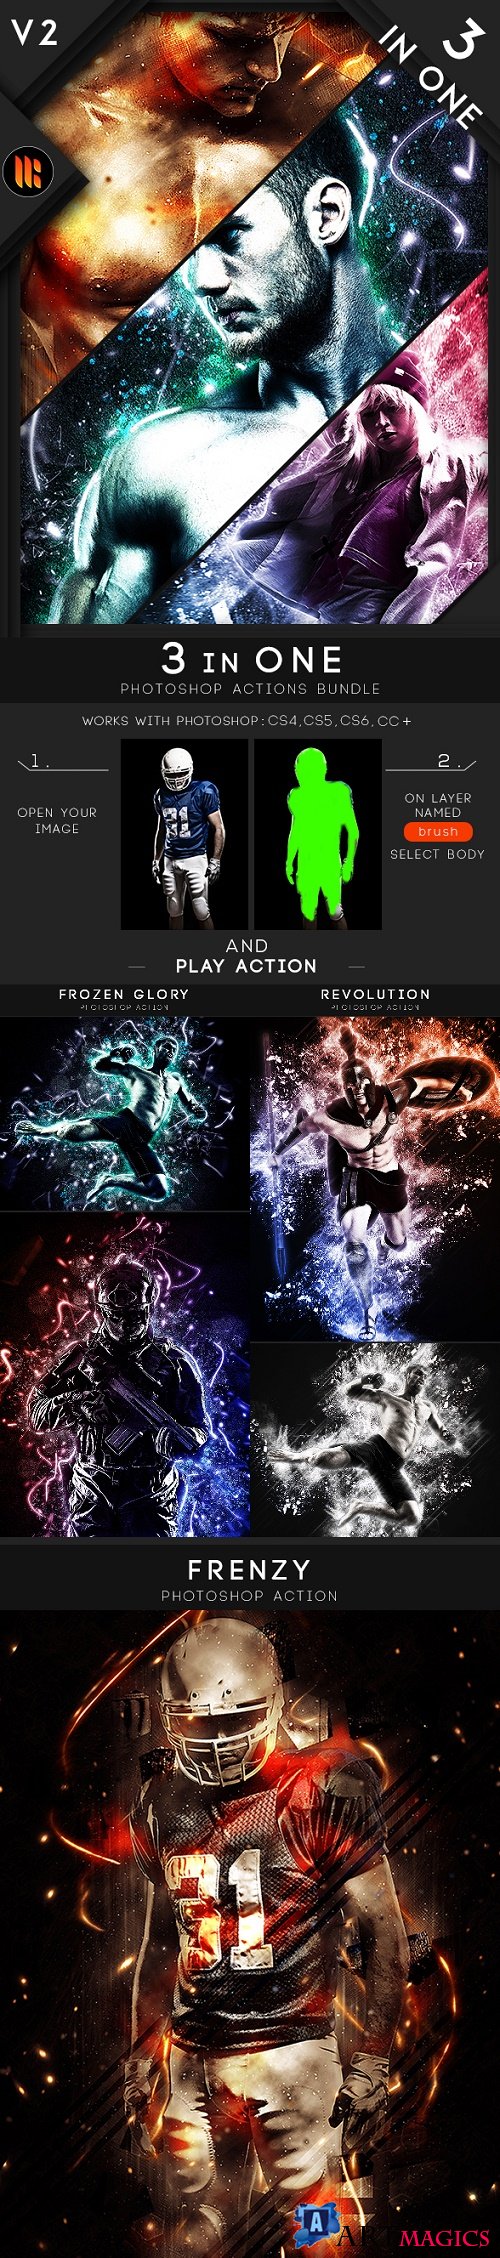 3 In One Photoshop Actions Bundle V2 - 21801393